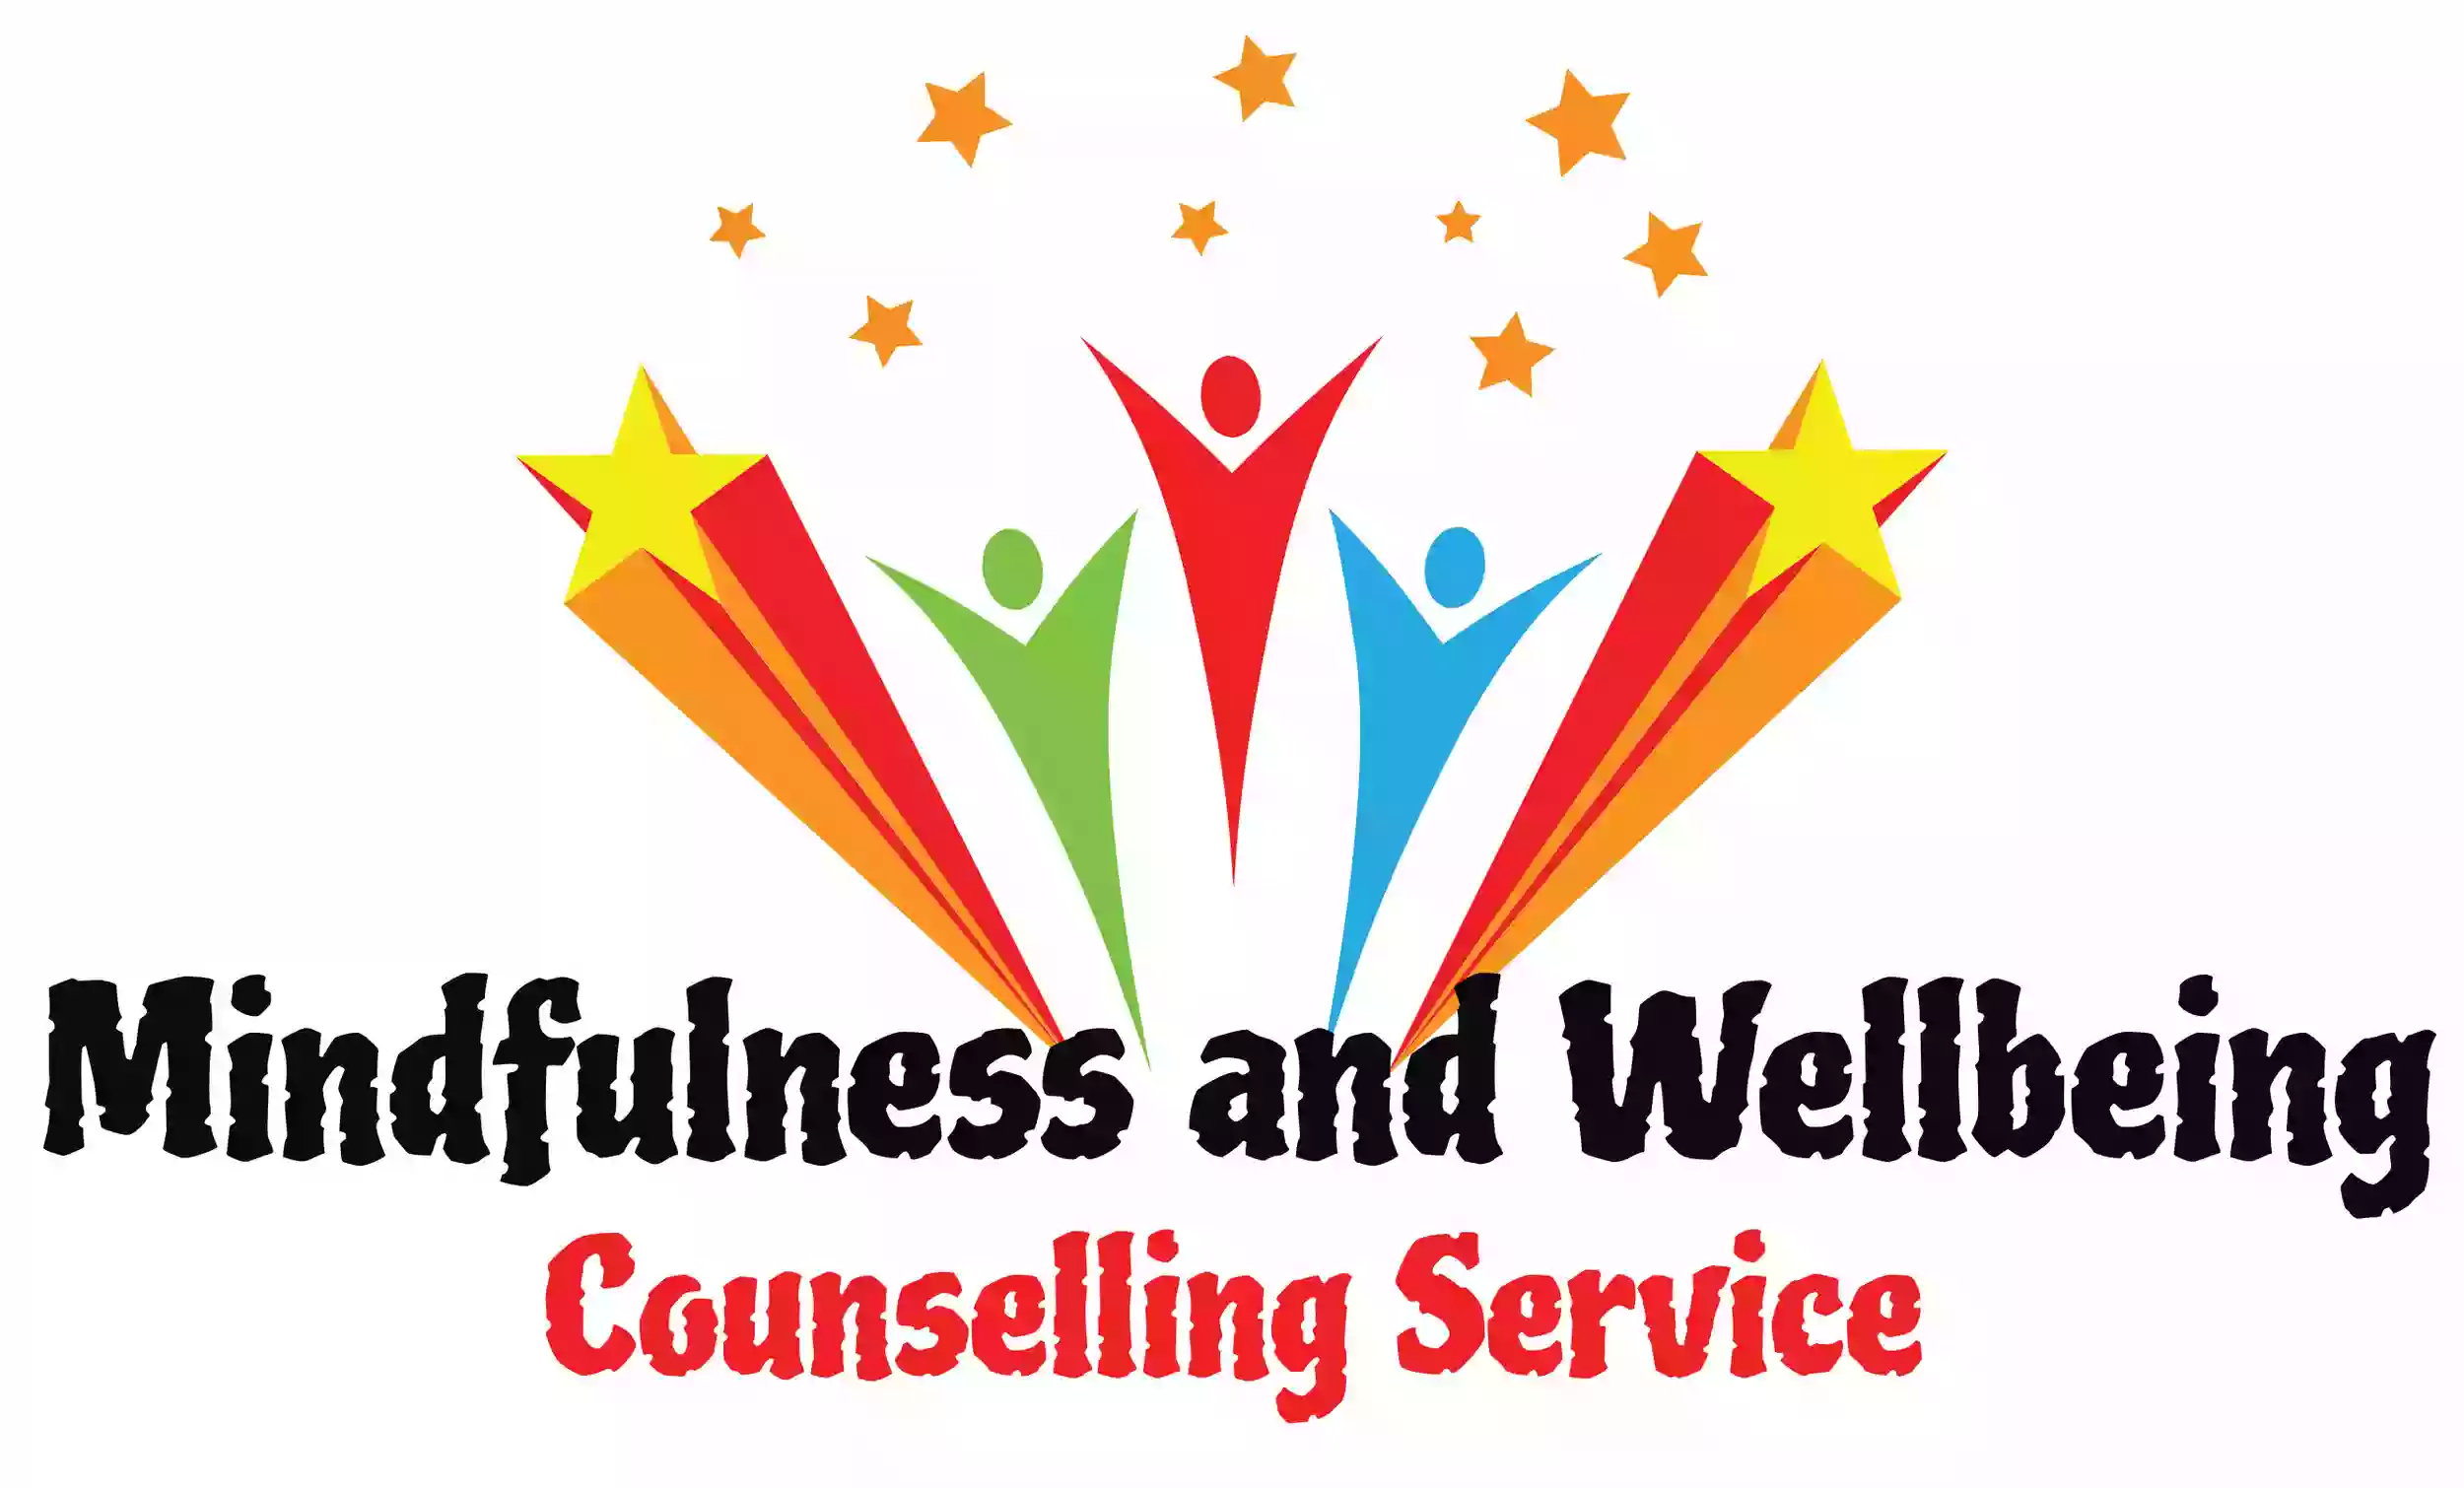 Mindfulness and Wellbeing Counselling Service